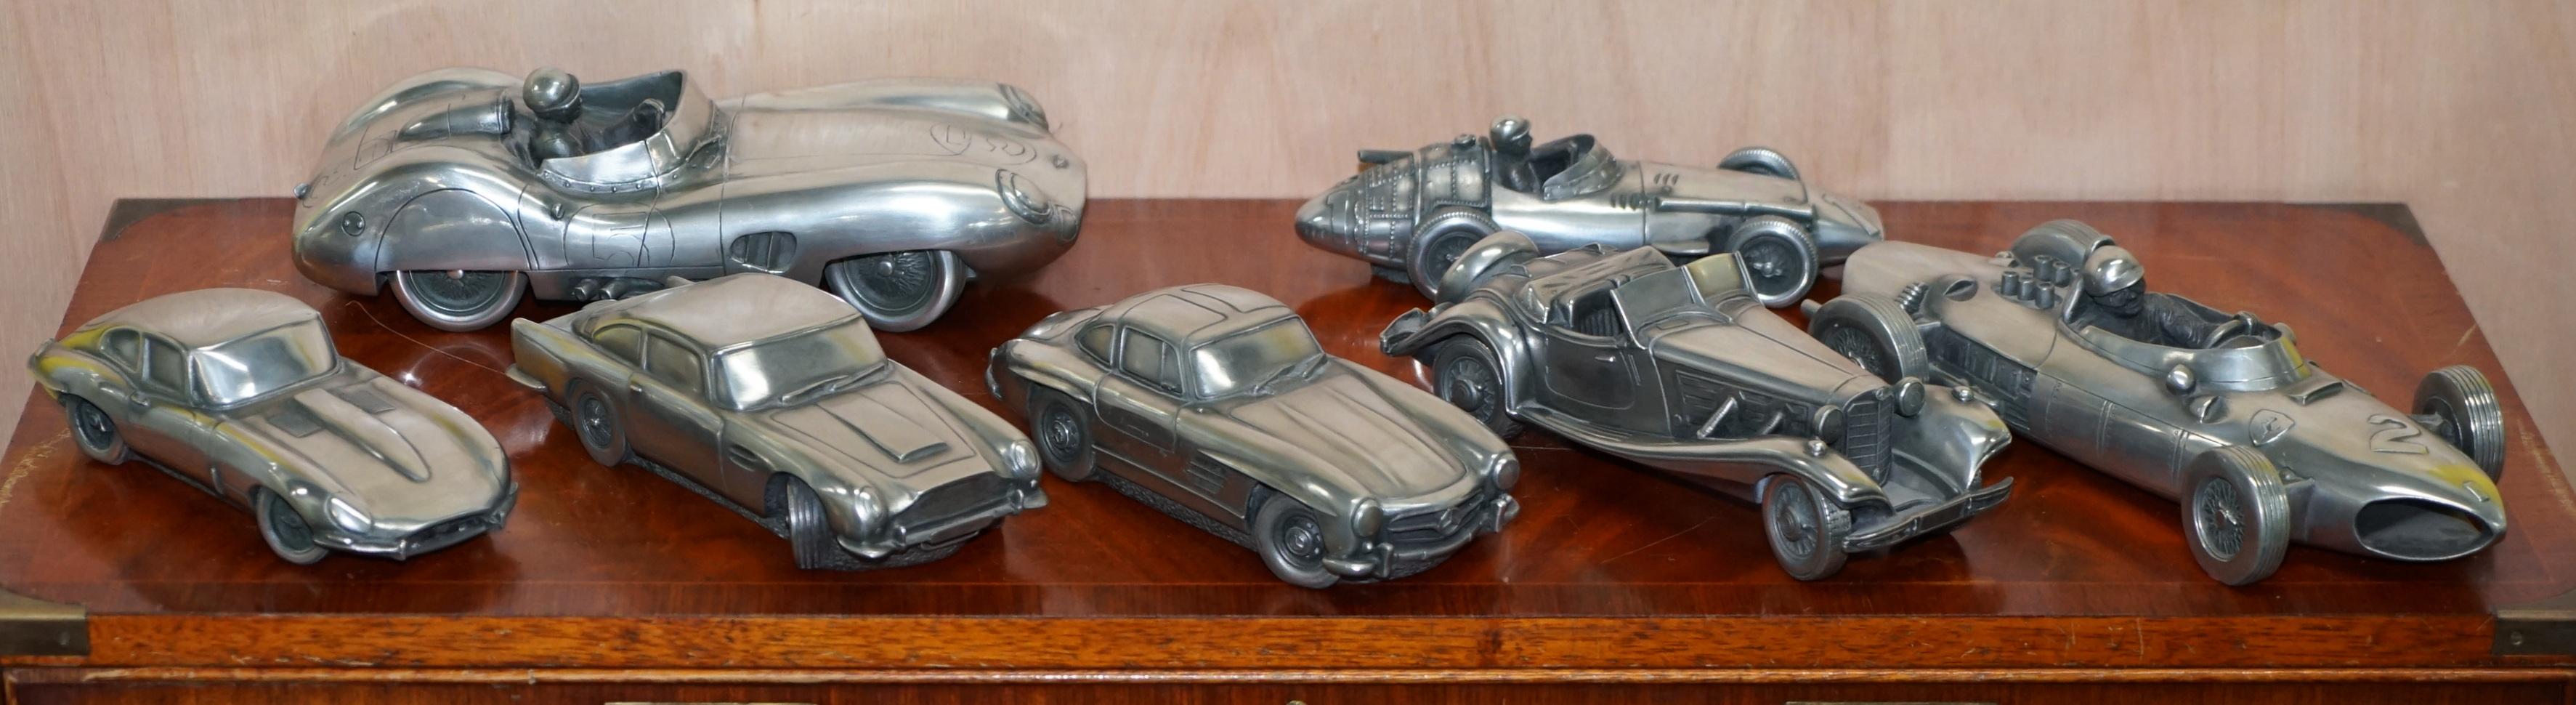 We are delighted to offer for sale this stunning vintage heavy aged pewter racing car

This car is part of a set, I have included a picture of the whole suite however this sale is for the car detailed below alone, the others are all listed for